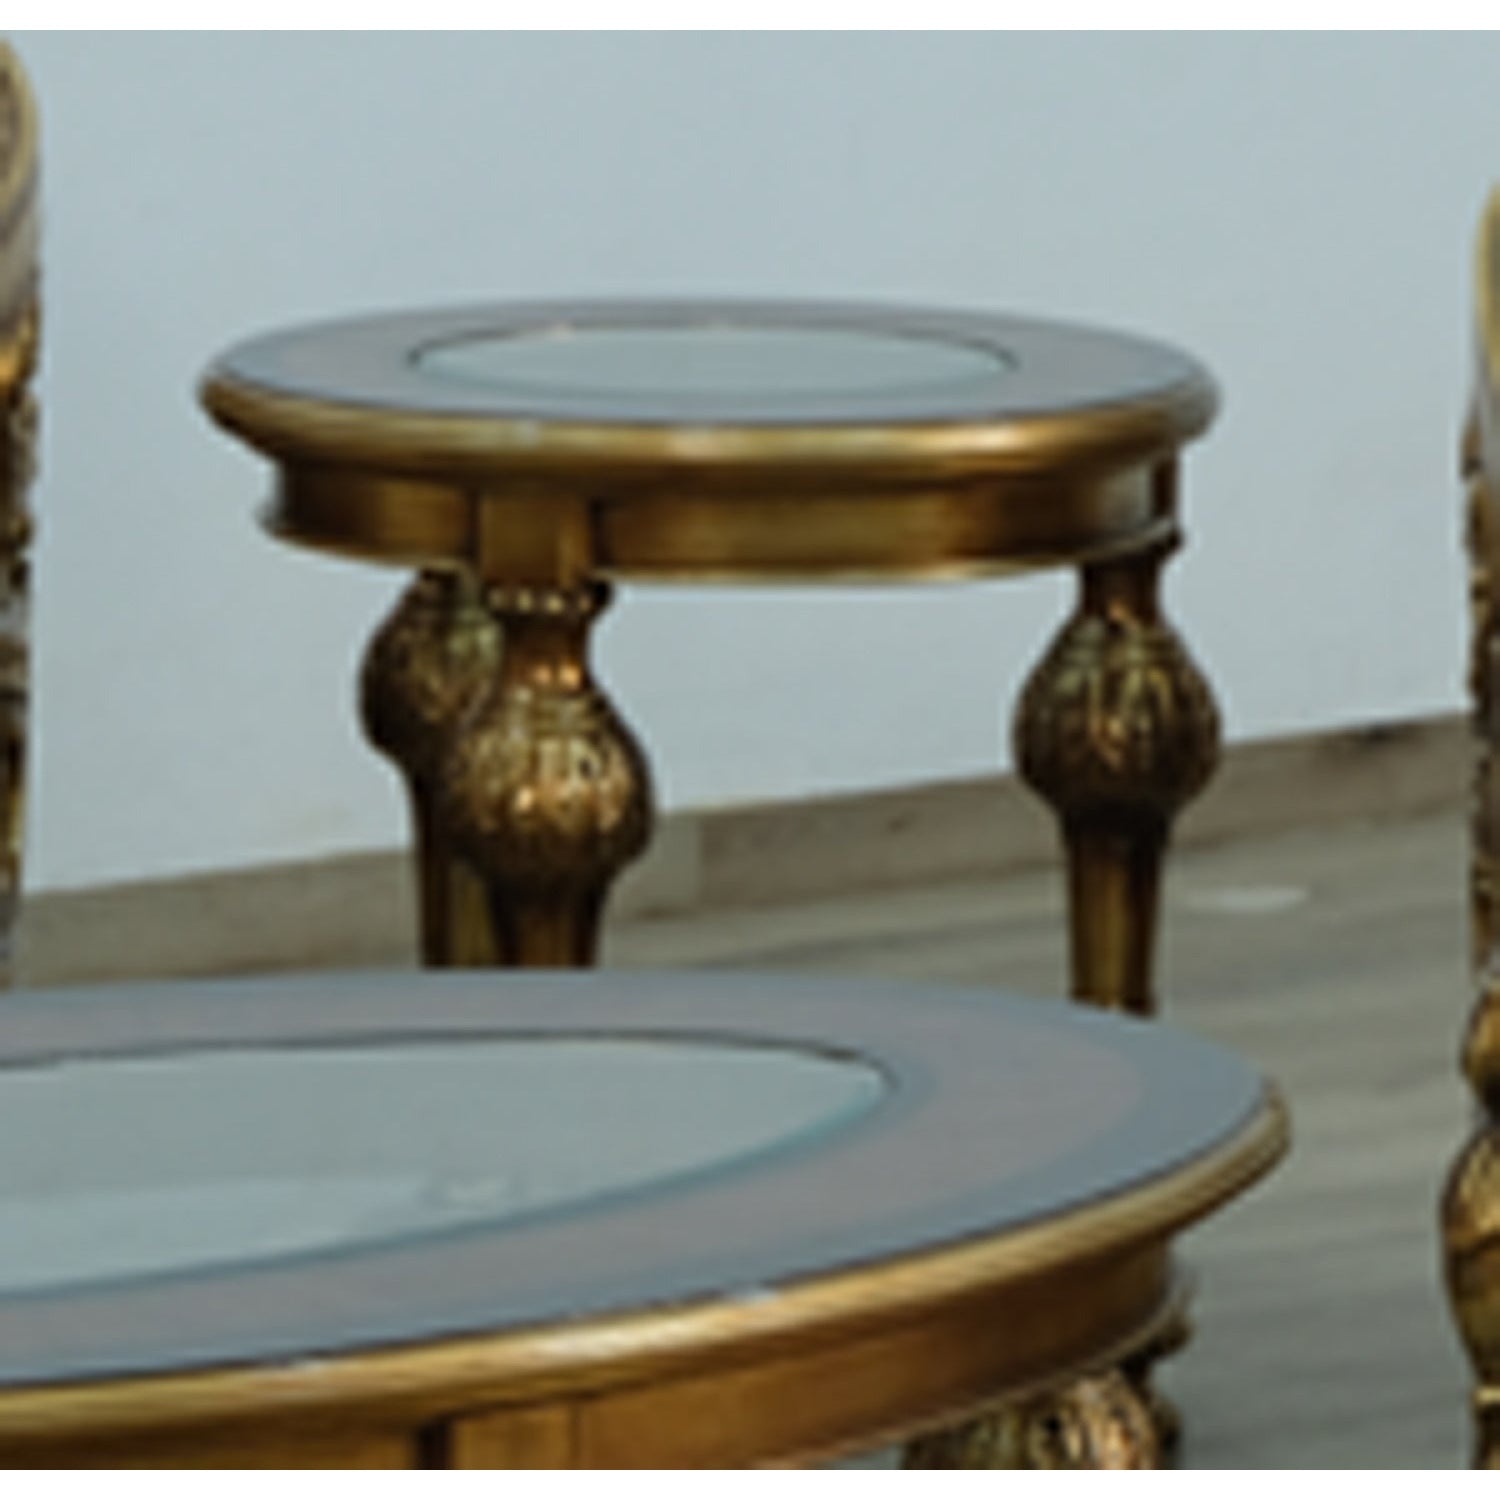 European Furniture - Bellagio End Table in Antique Bronze Gold Fabric- 30016-ET - New Star Living